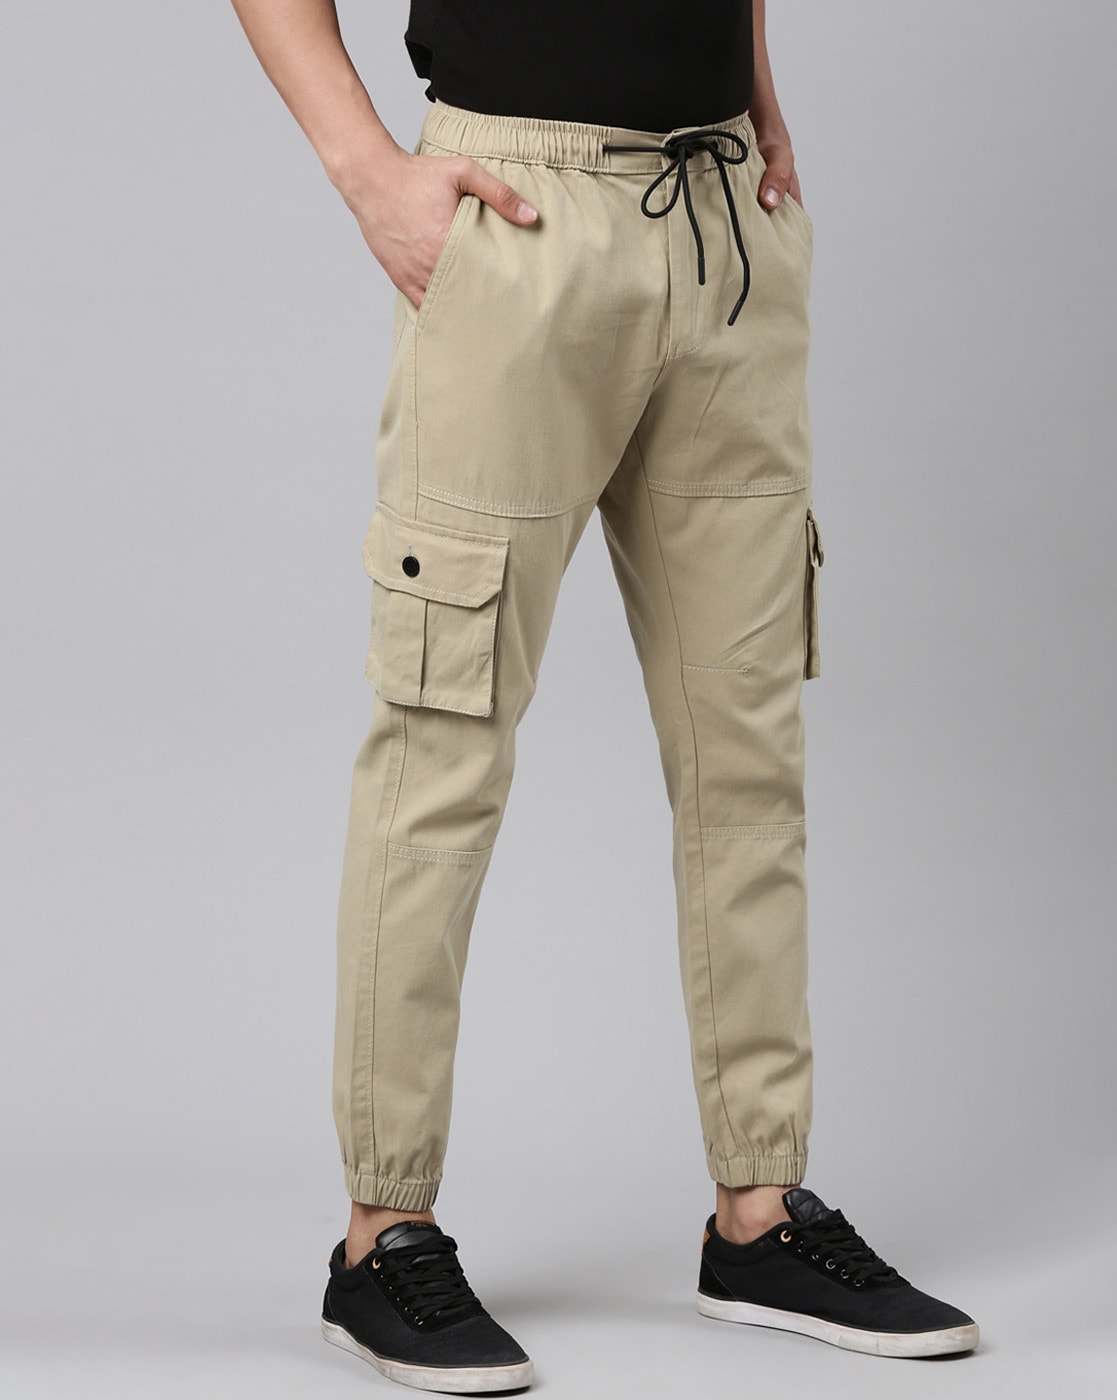 What To Wear With Khaki Pants for Guys in 2023  The Highest Fashion